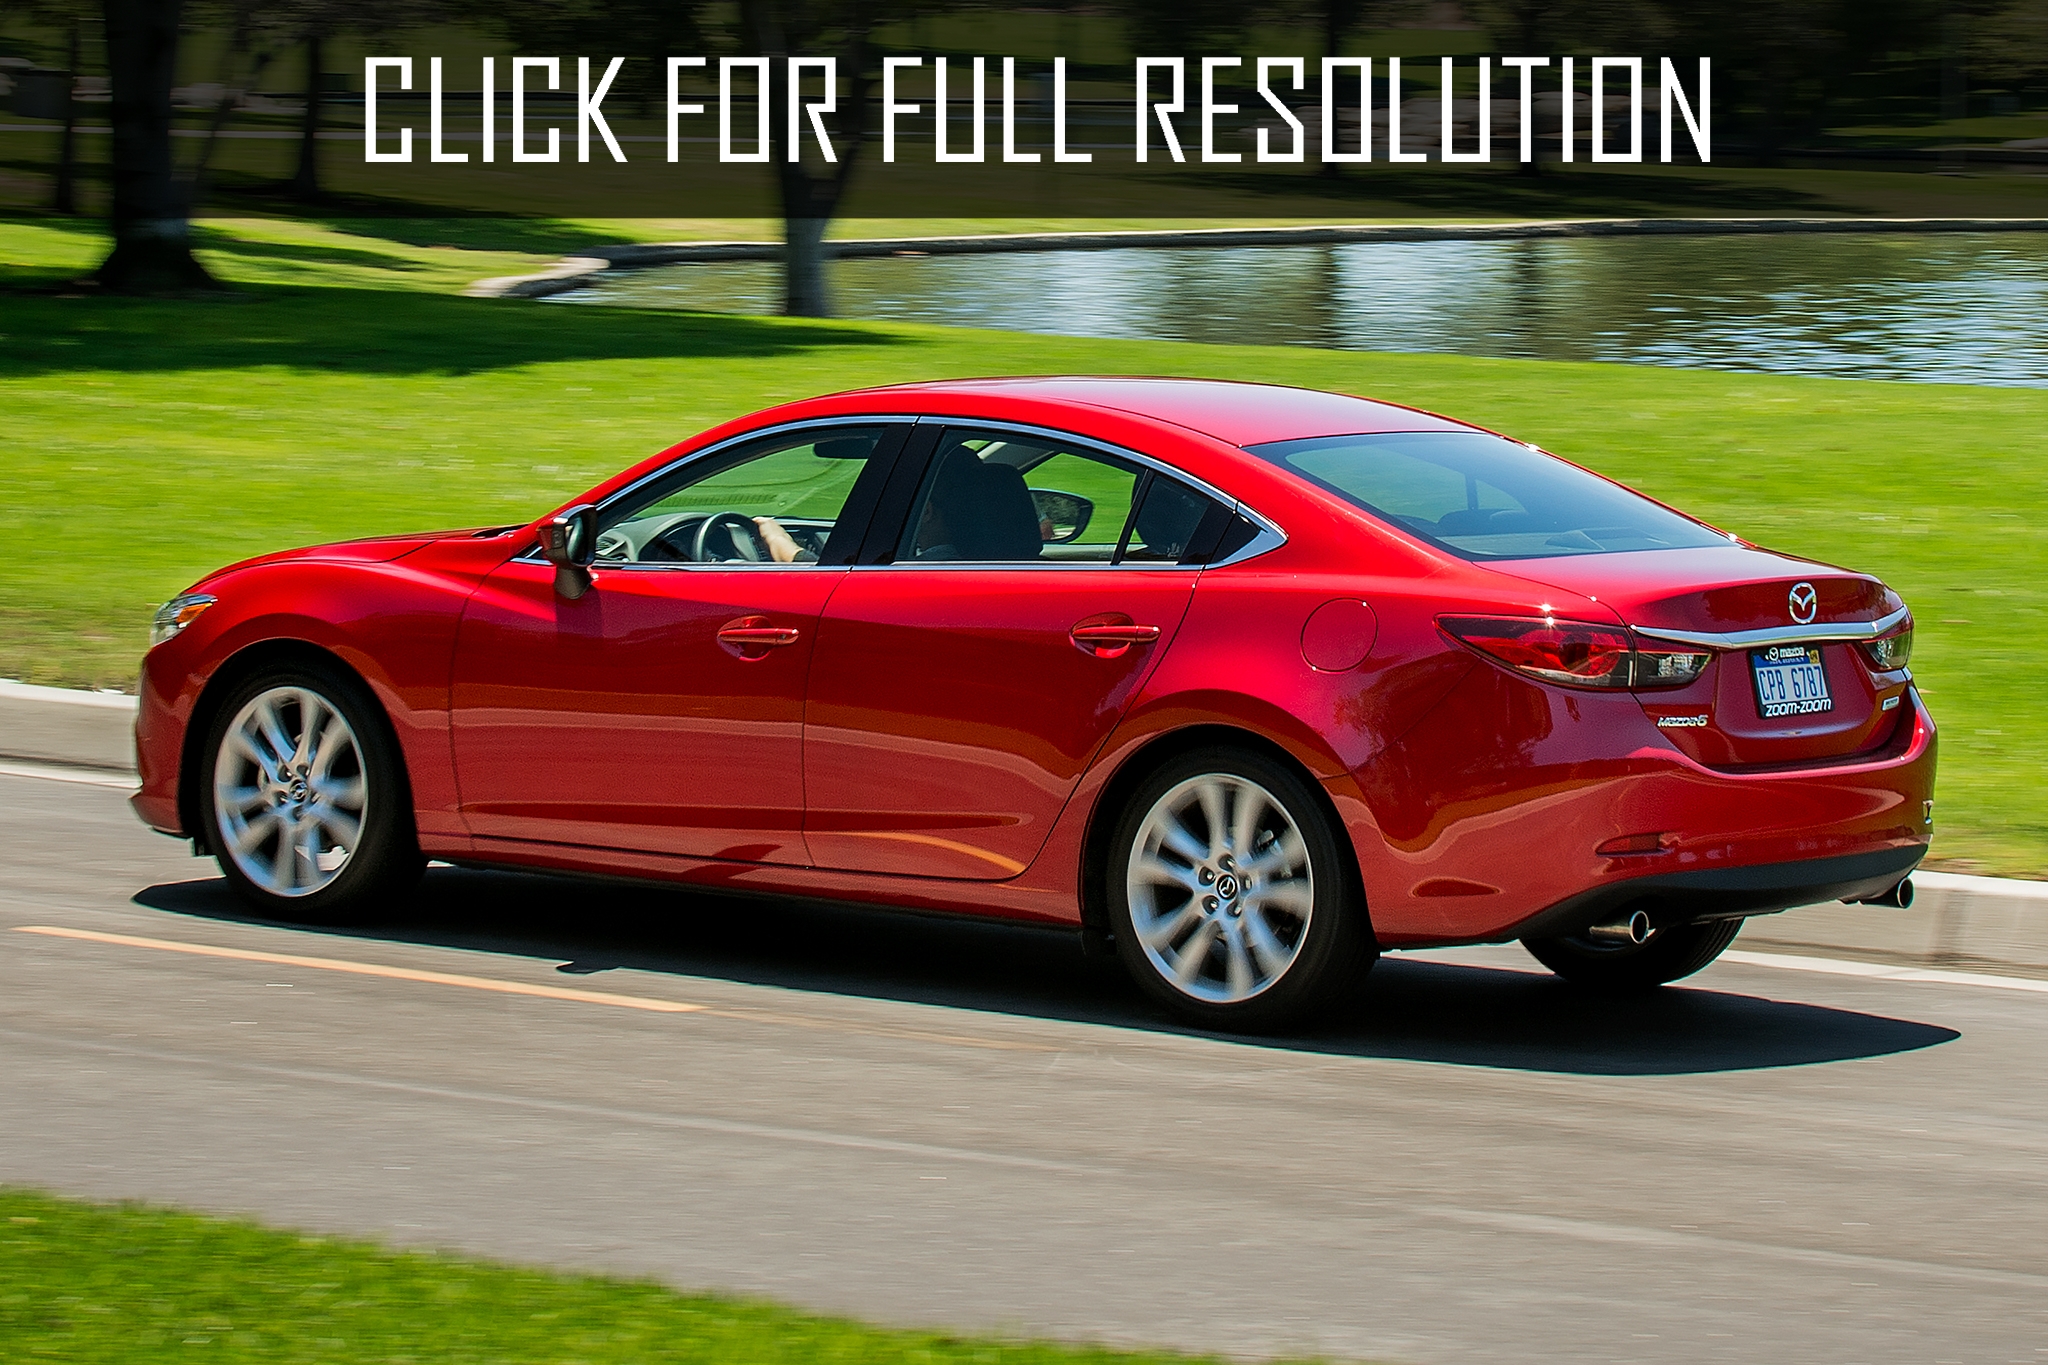 2014 Mazda 6 news, reviews, msrp, ratings with amazing